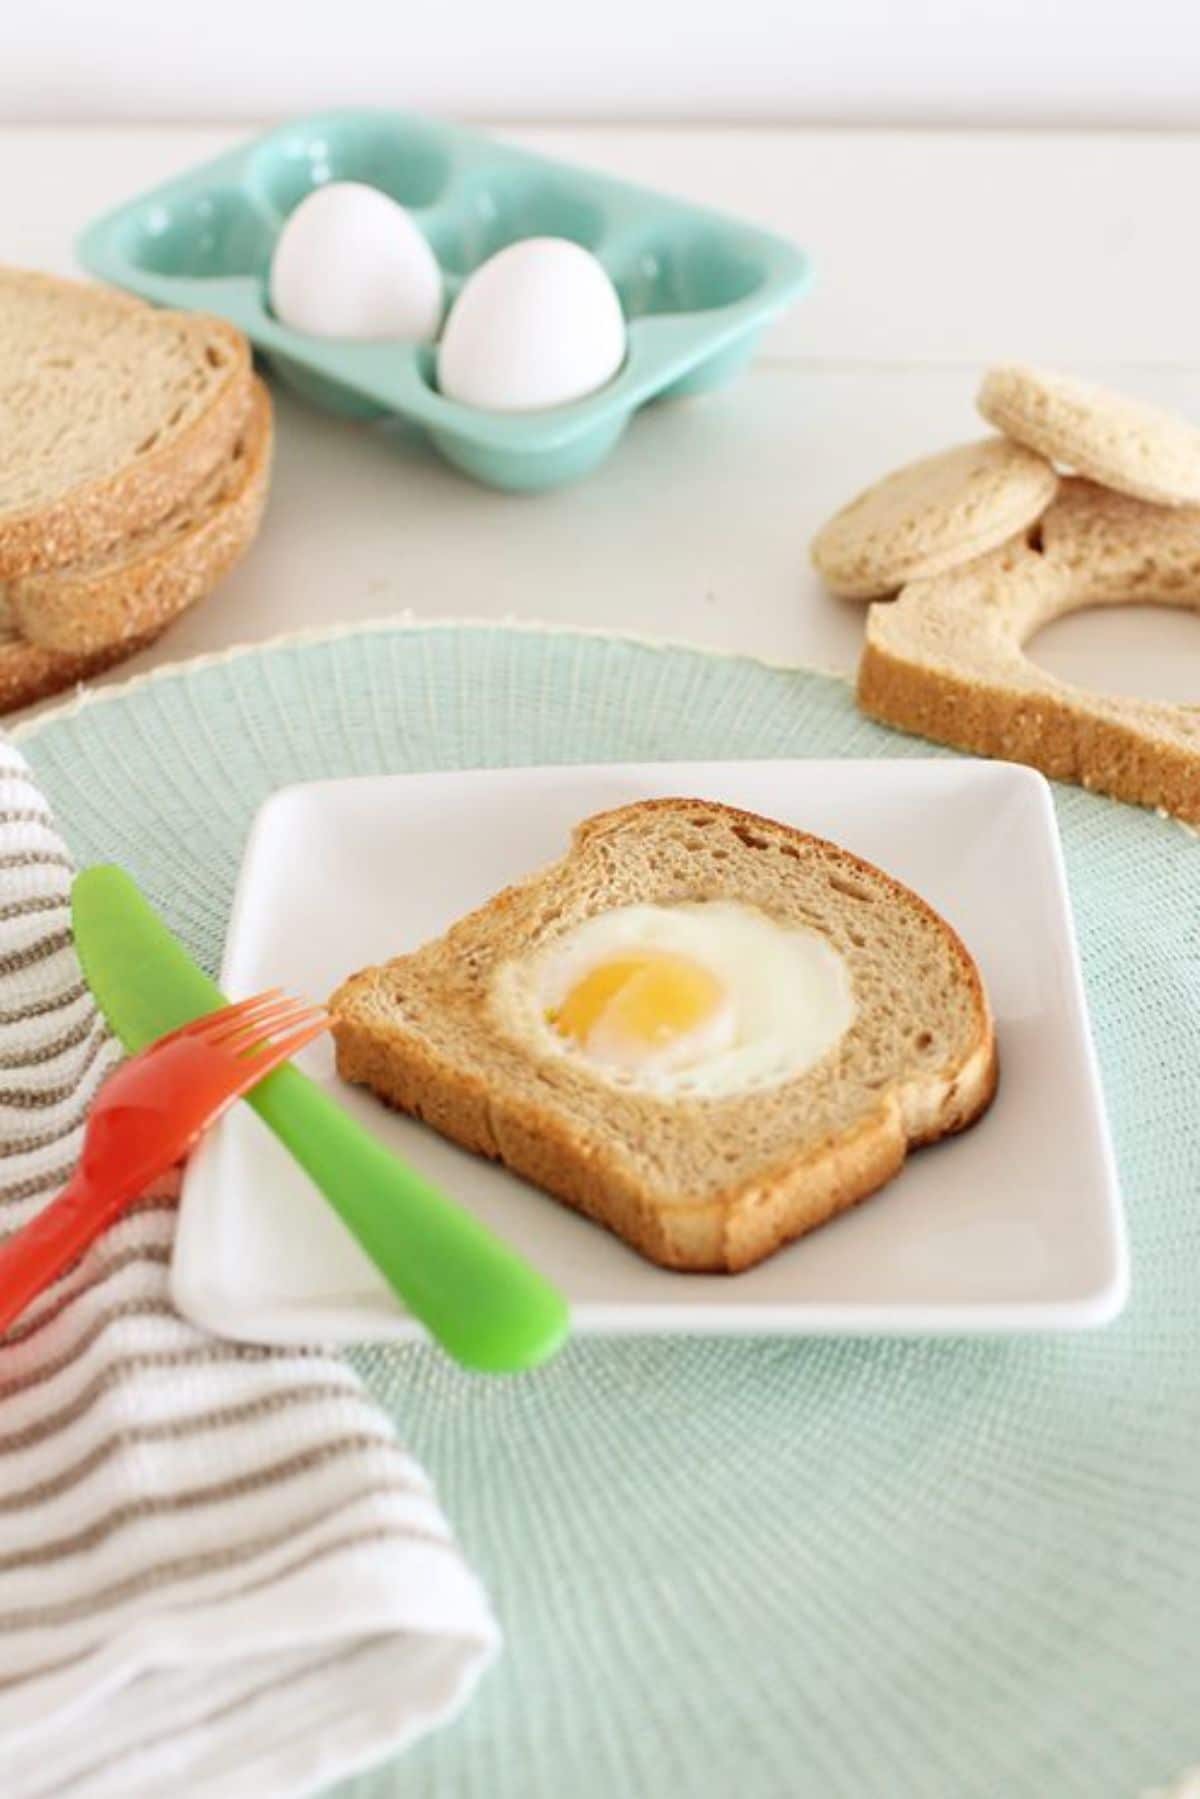 a slice of taost with a fried egg in the middle sits on a square plate. 2 eggs are in an egg box behind, with slices of bread and some plastic cutlery